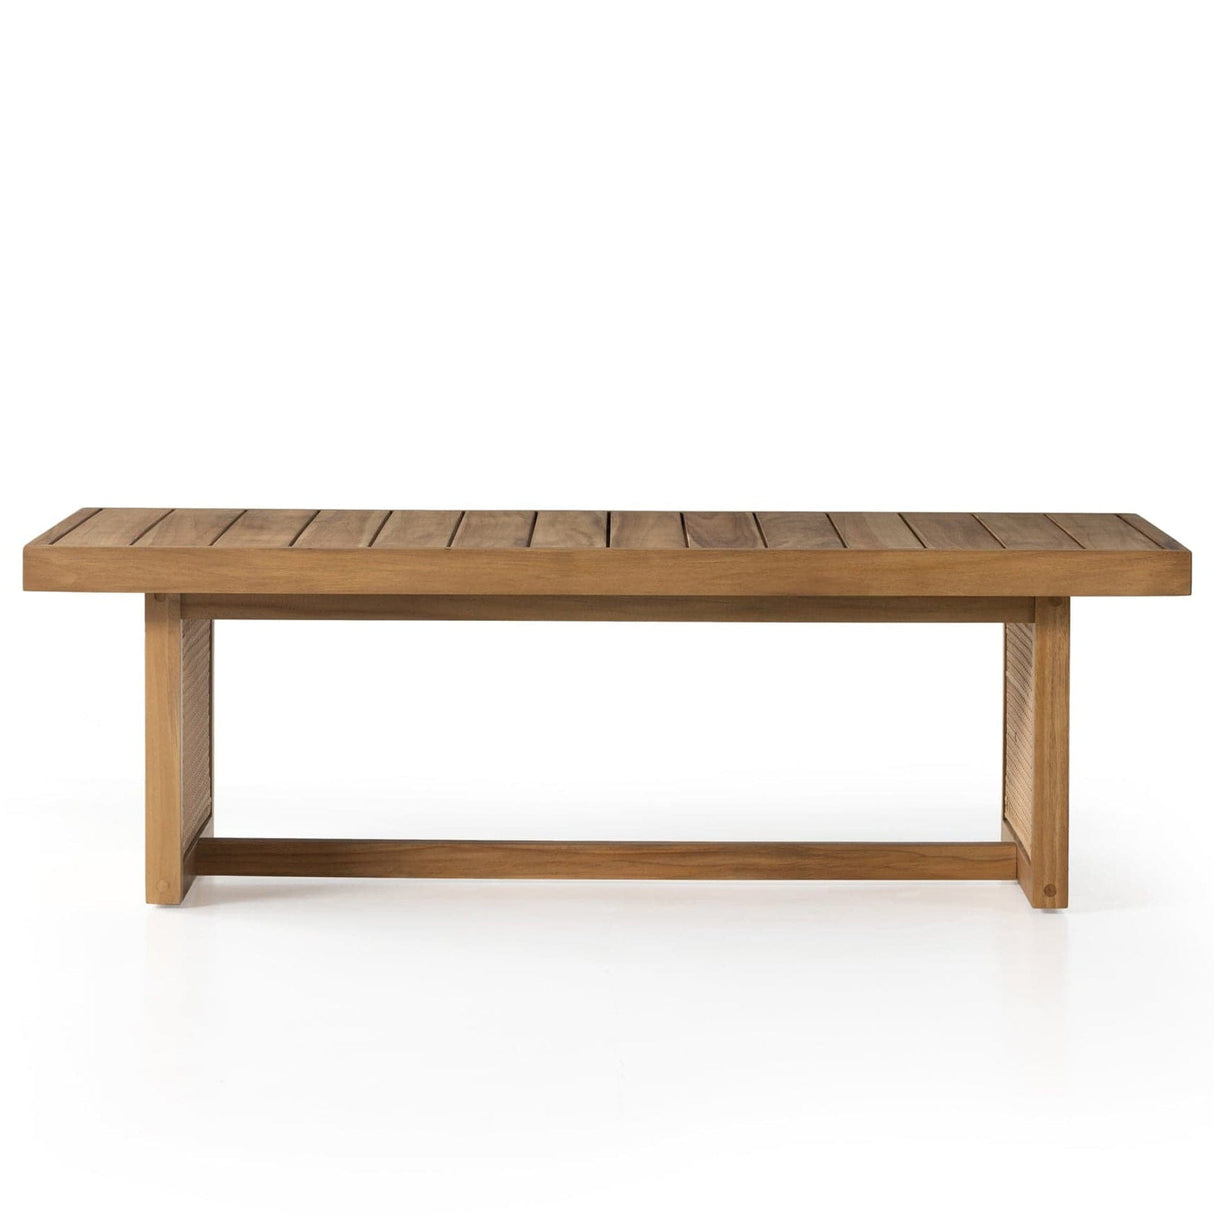 Four Hands Merit Outdoor Coffee Table-Natural Teak Furniture four-hands-229412-001